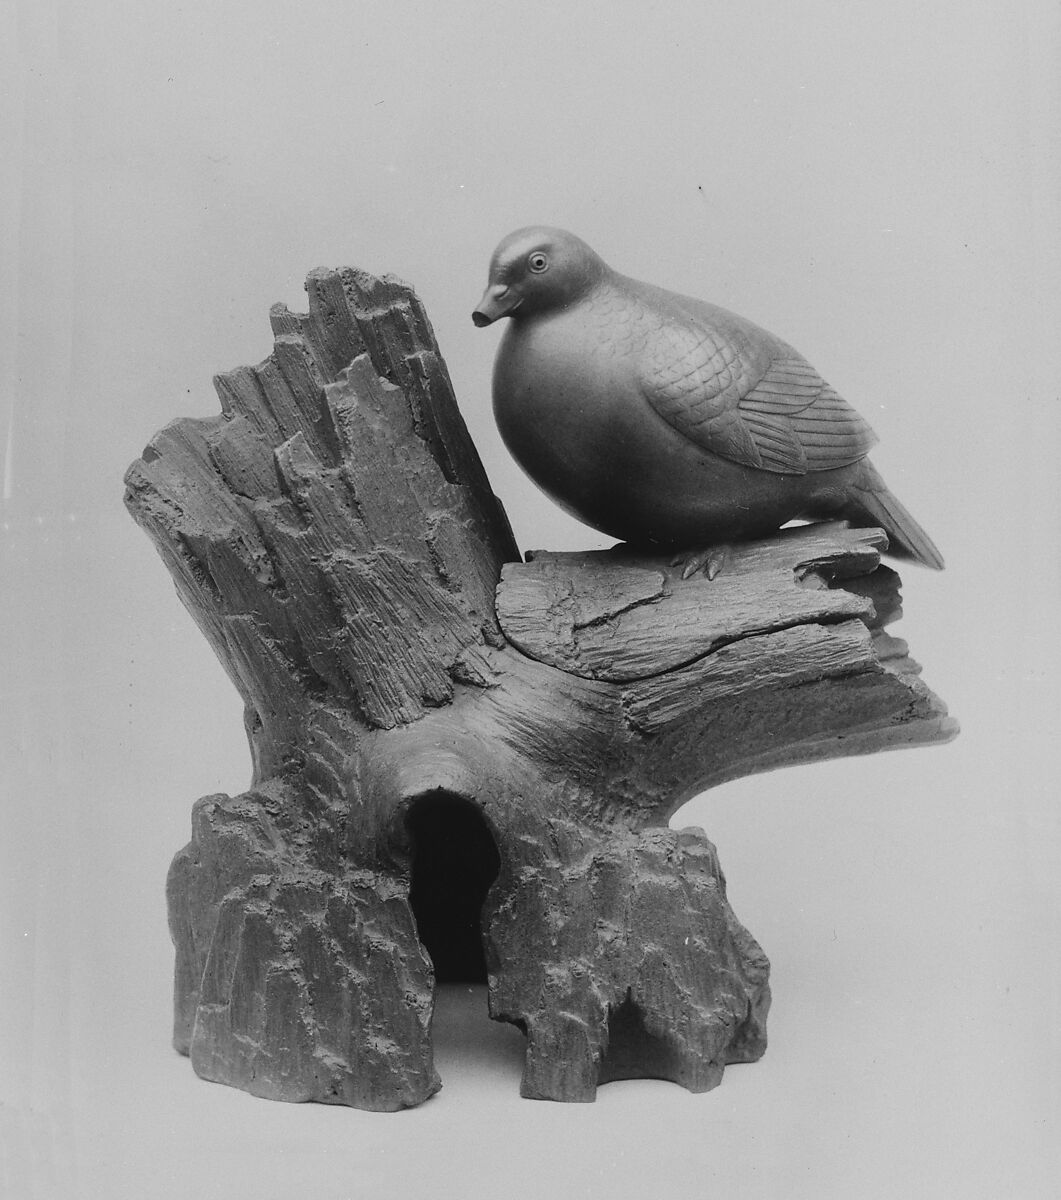 Pigeon on a Stump, Stoneware covered with a thin glaze (Bizen ware), Japan 